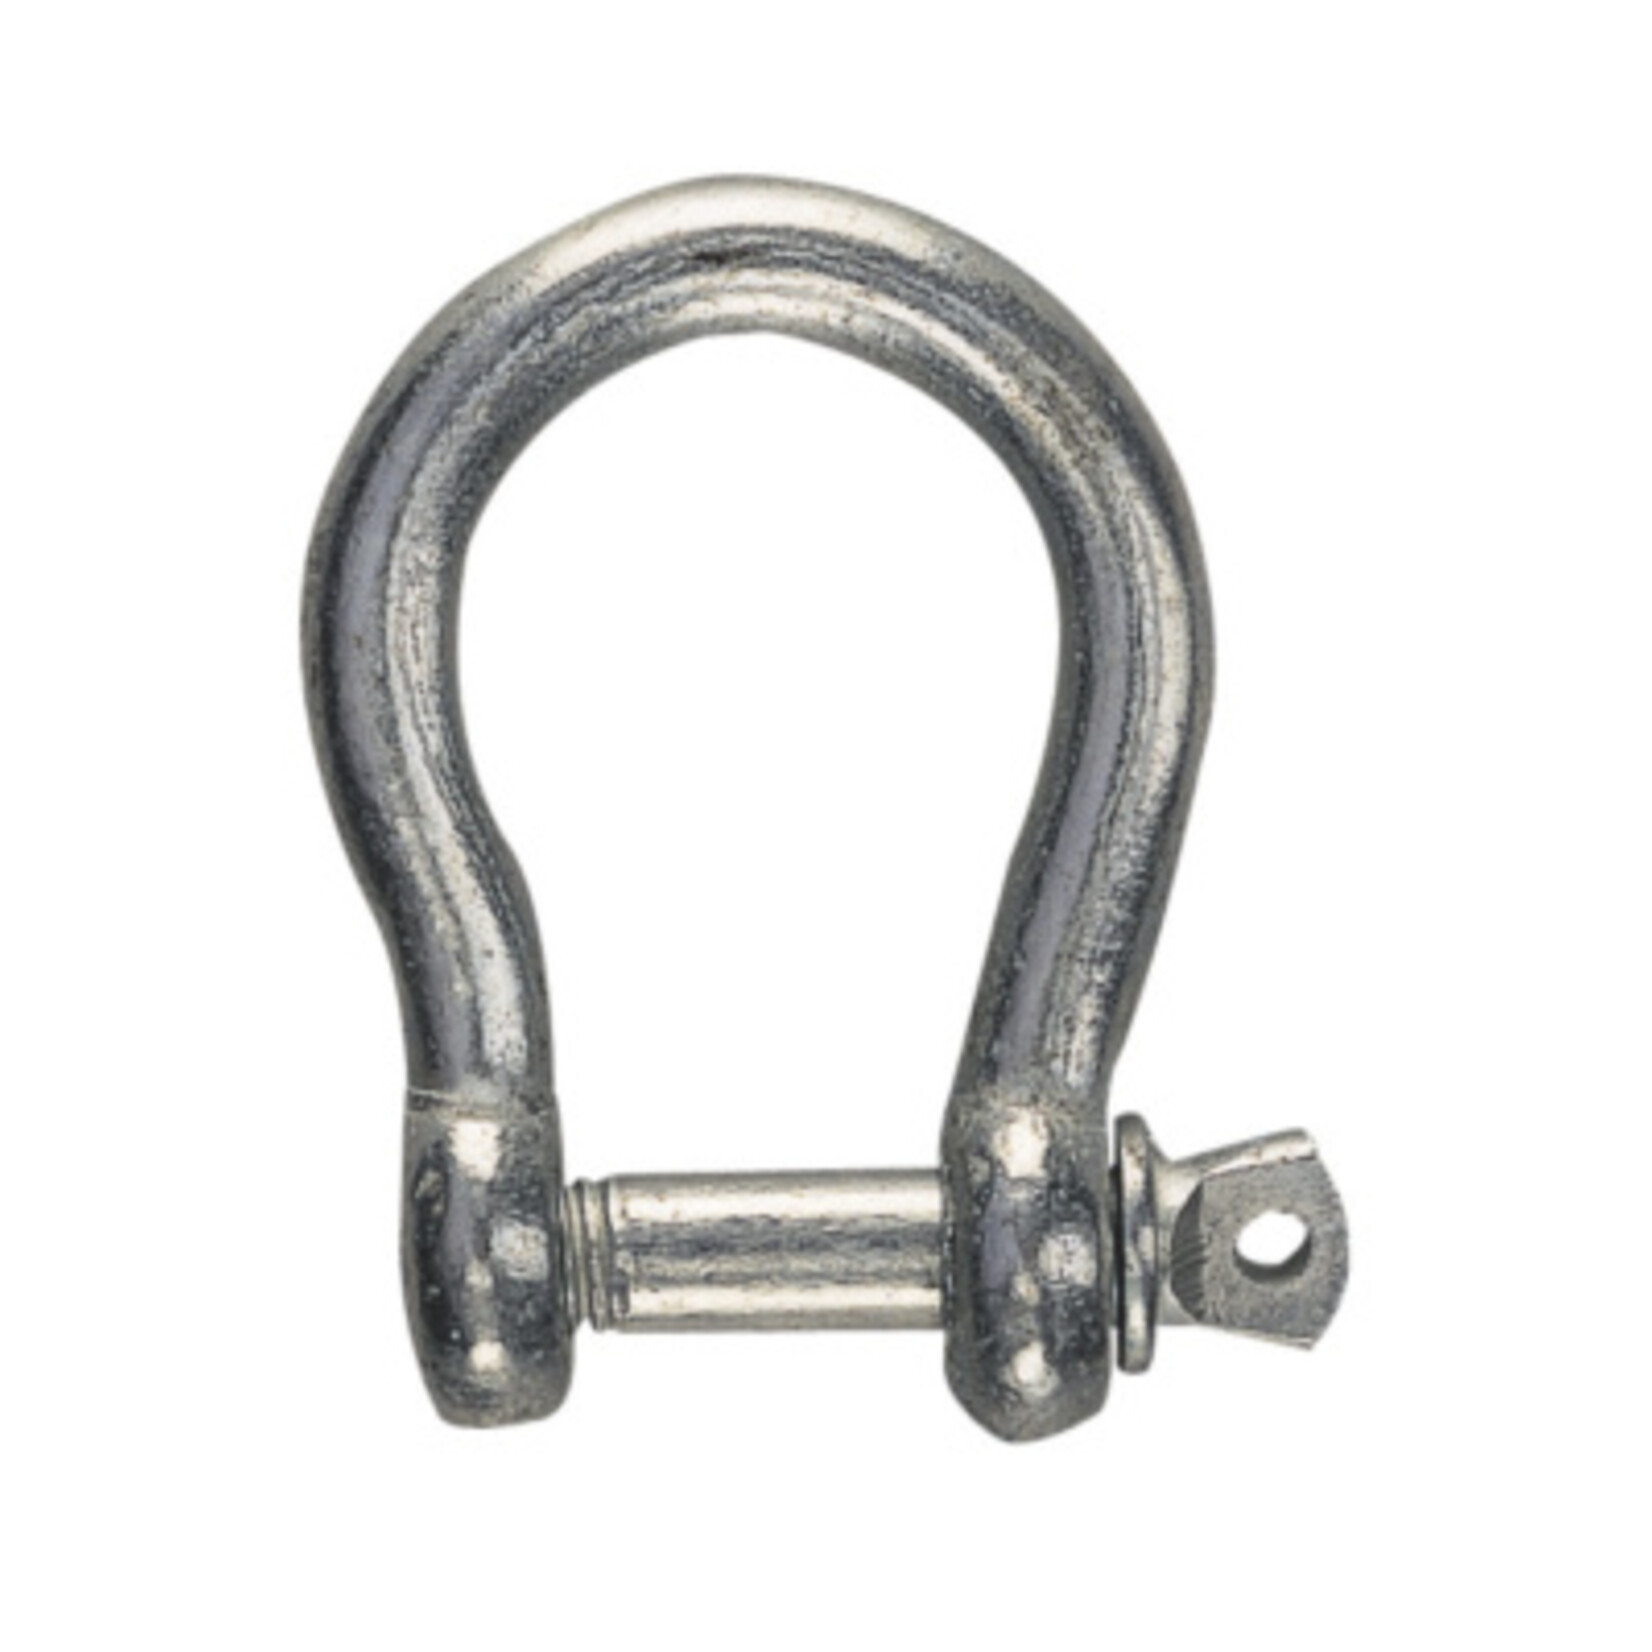 Plastimo Shackle gal bow dia 10mm yellow code